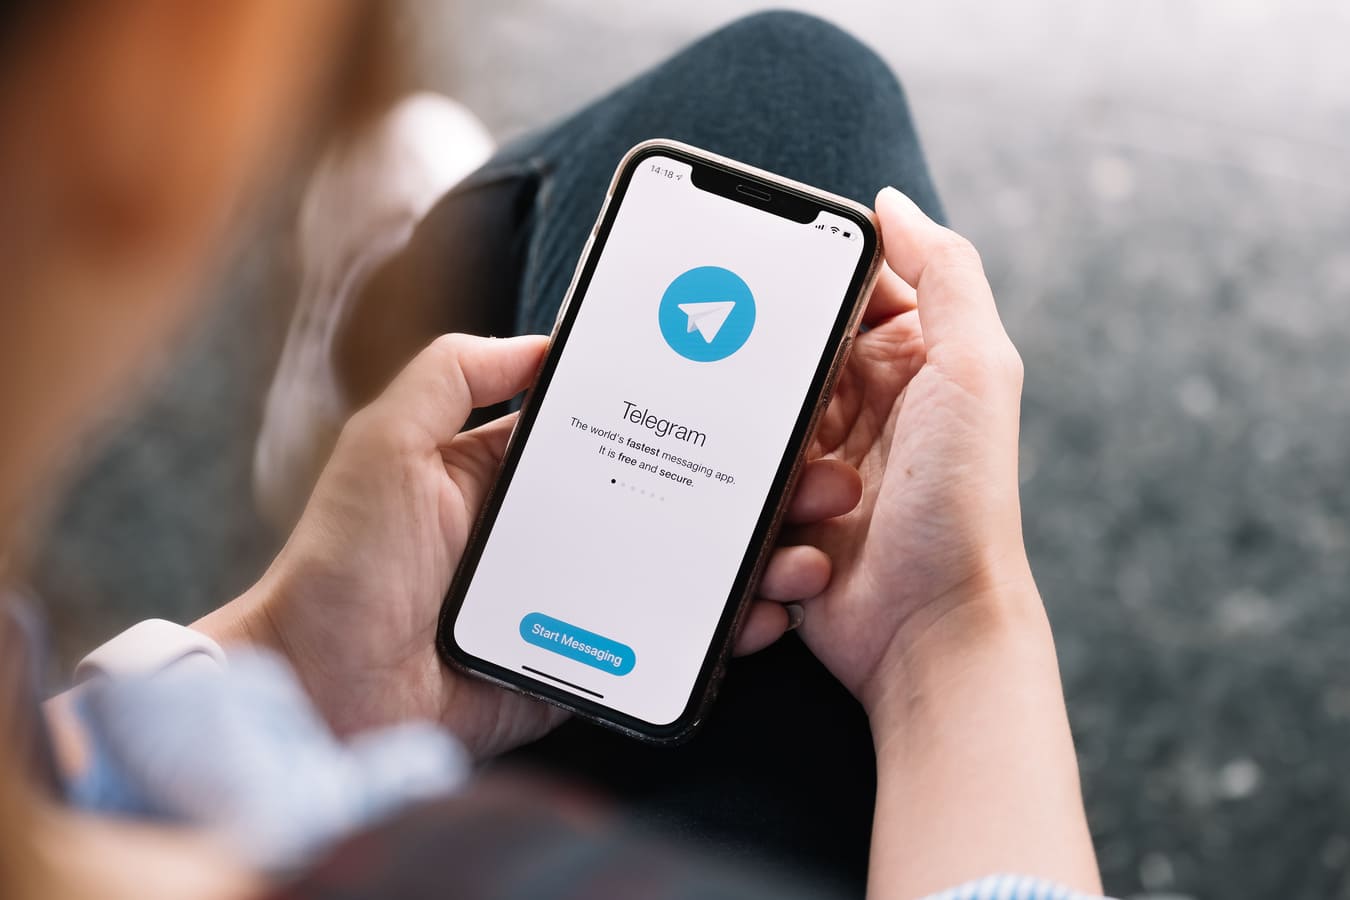 Telegram allows users to trade, send and pay with cryptocurrencies